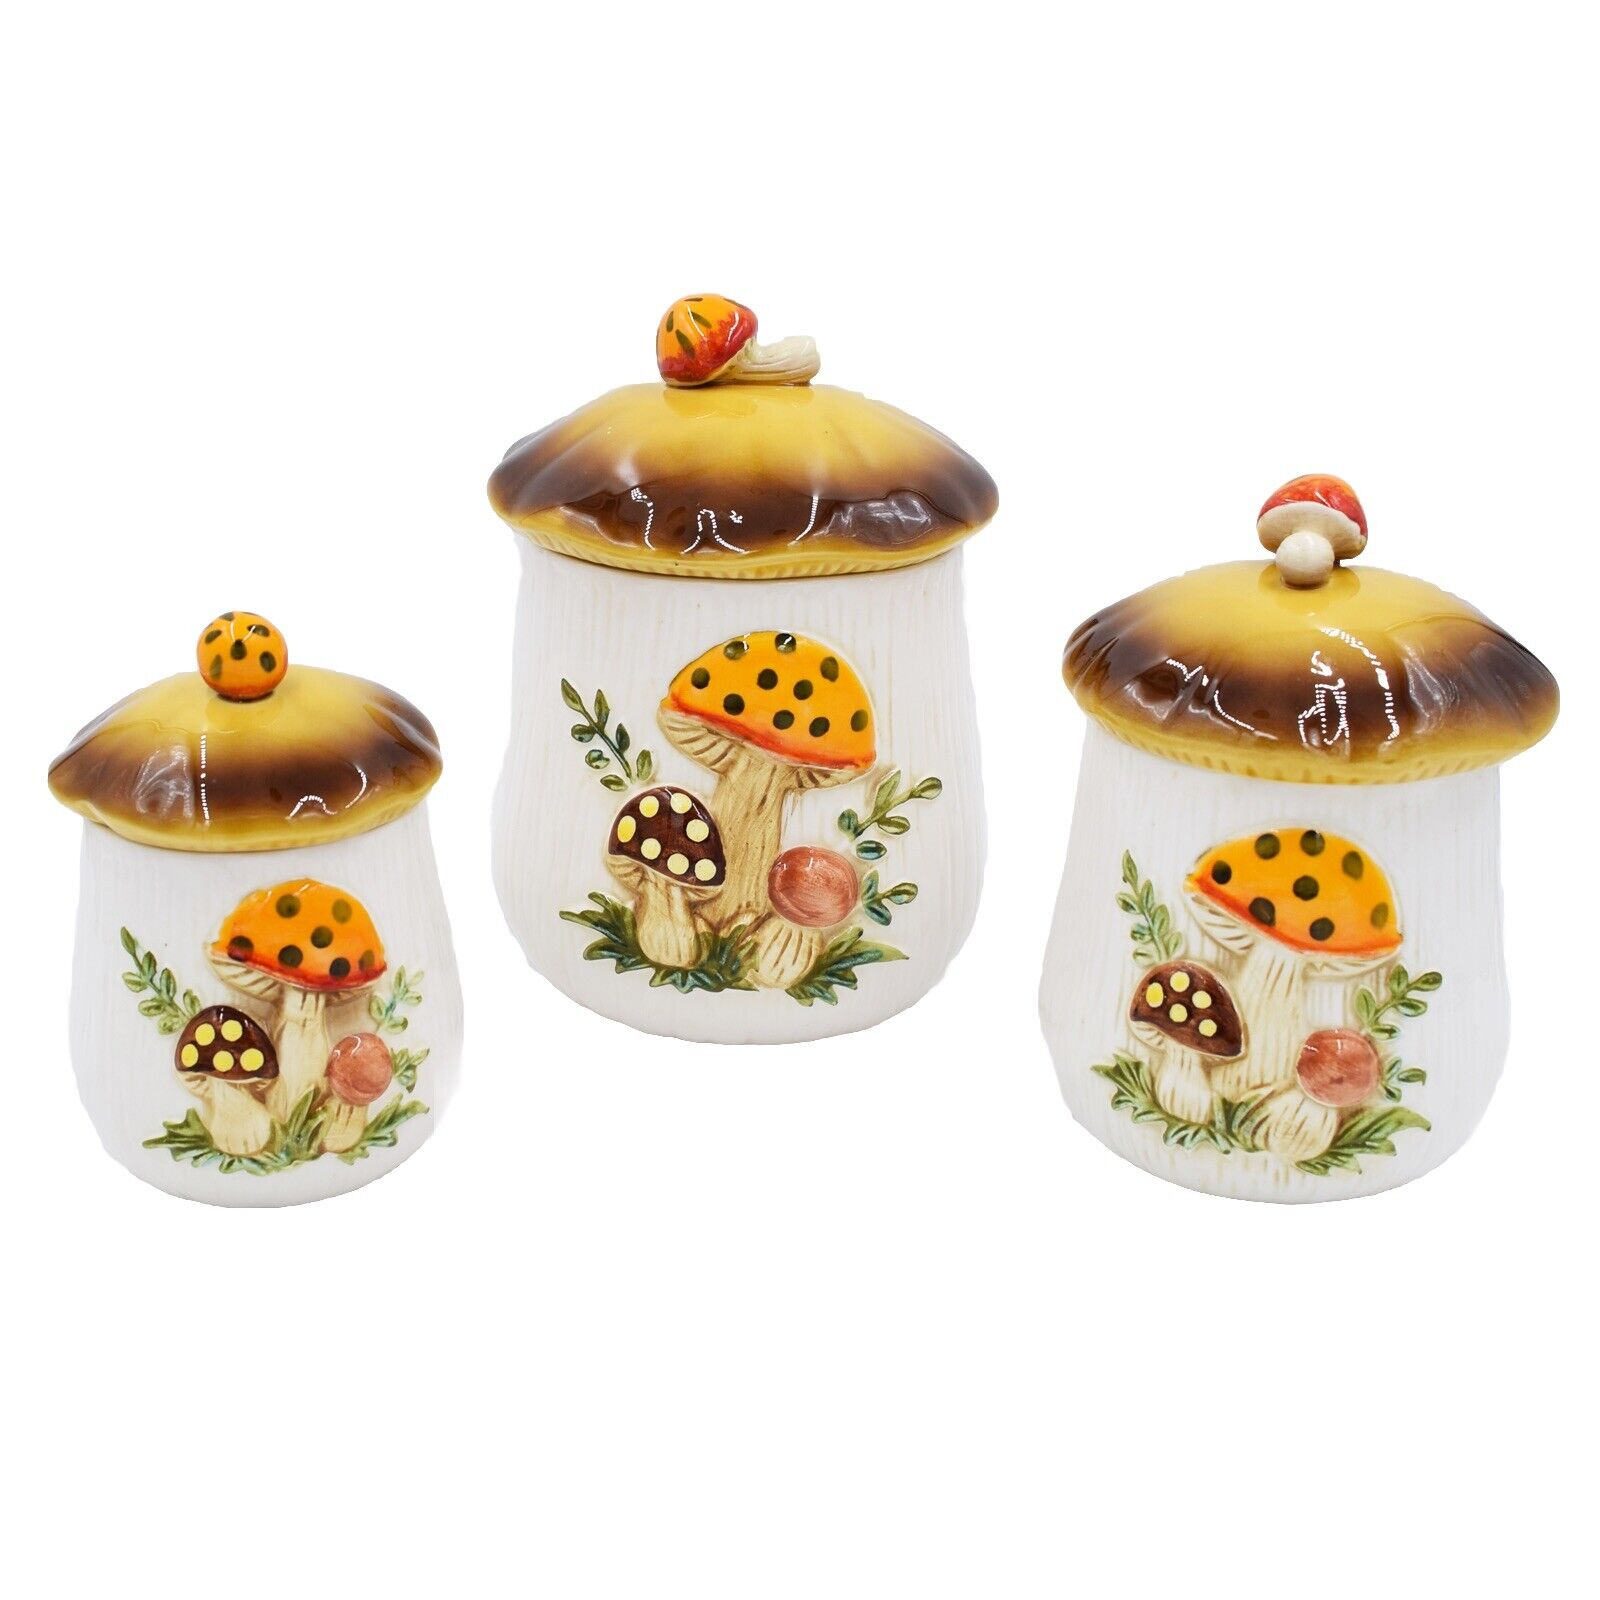 Merry Mushroom 3 Piece Canister Set With Lids Sears Roebuck & Co Japan 1978